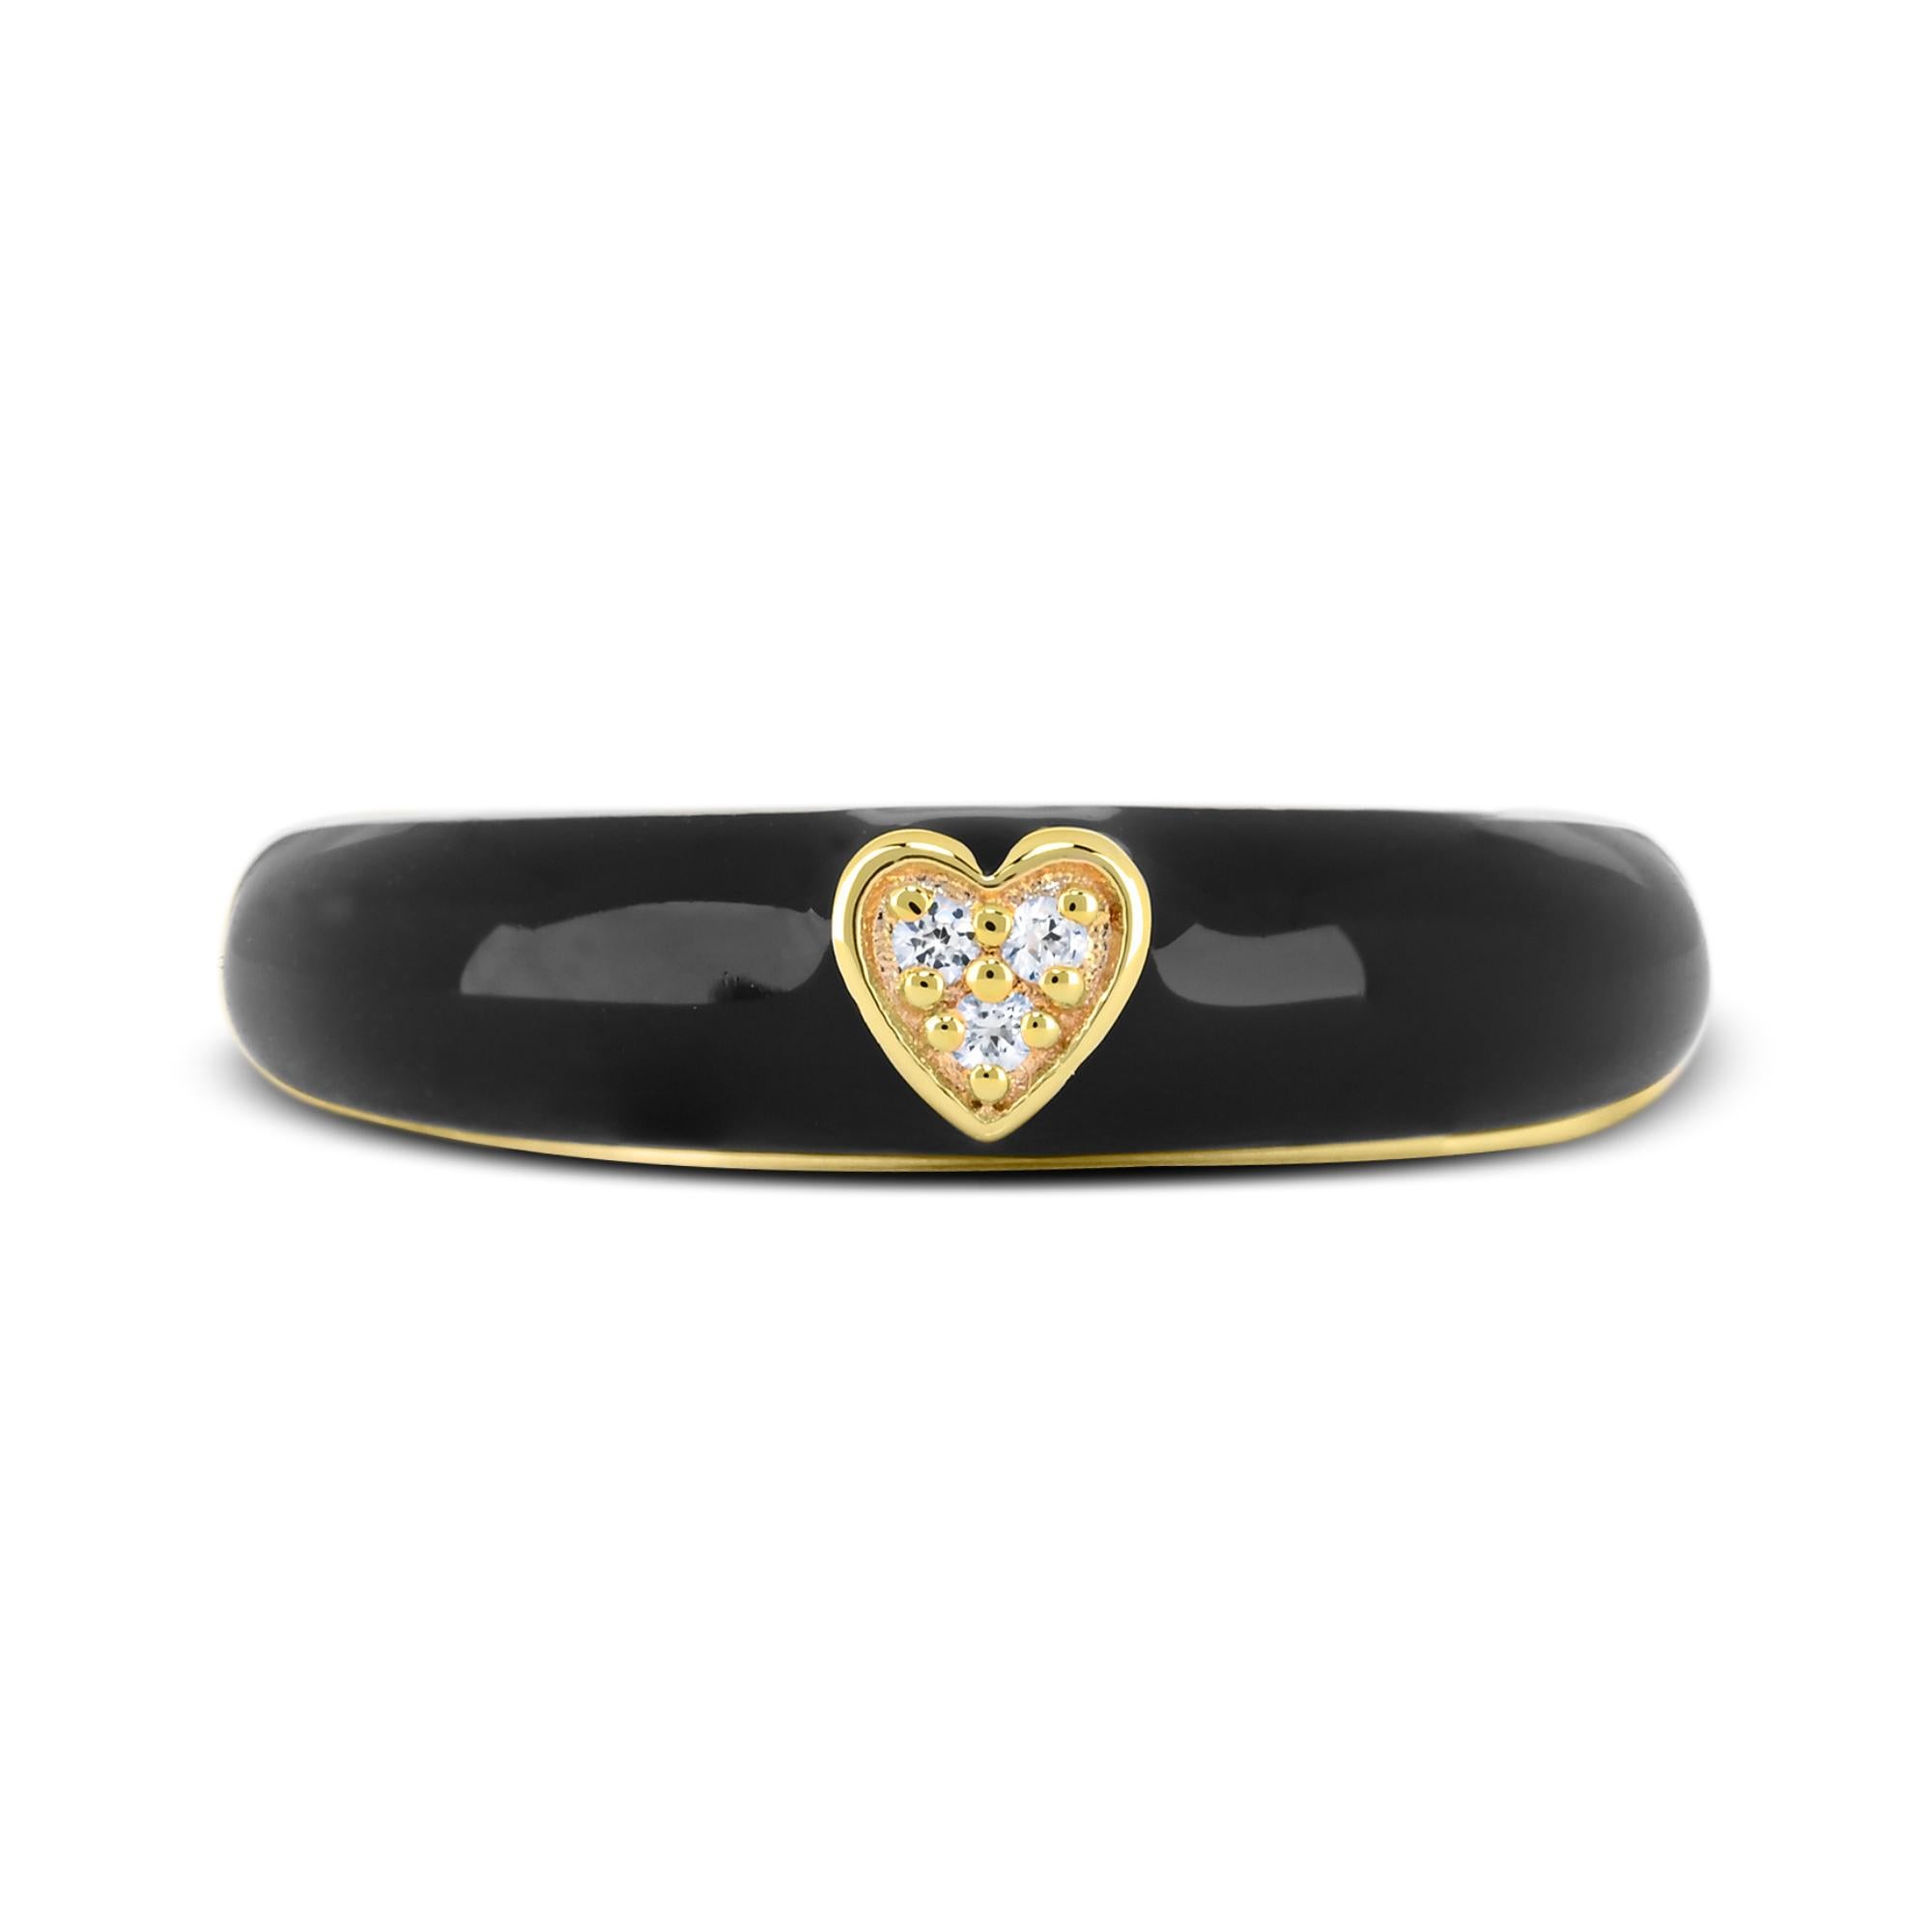 This elegant ring series features three created white sapphire pave set heart between black enamel shank on top of 14K yellow gold over sterling silver band ring. 

Metal: 14K Yellow Gold over Sterling Silver
Gems: Round Created White Sapphire -